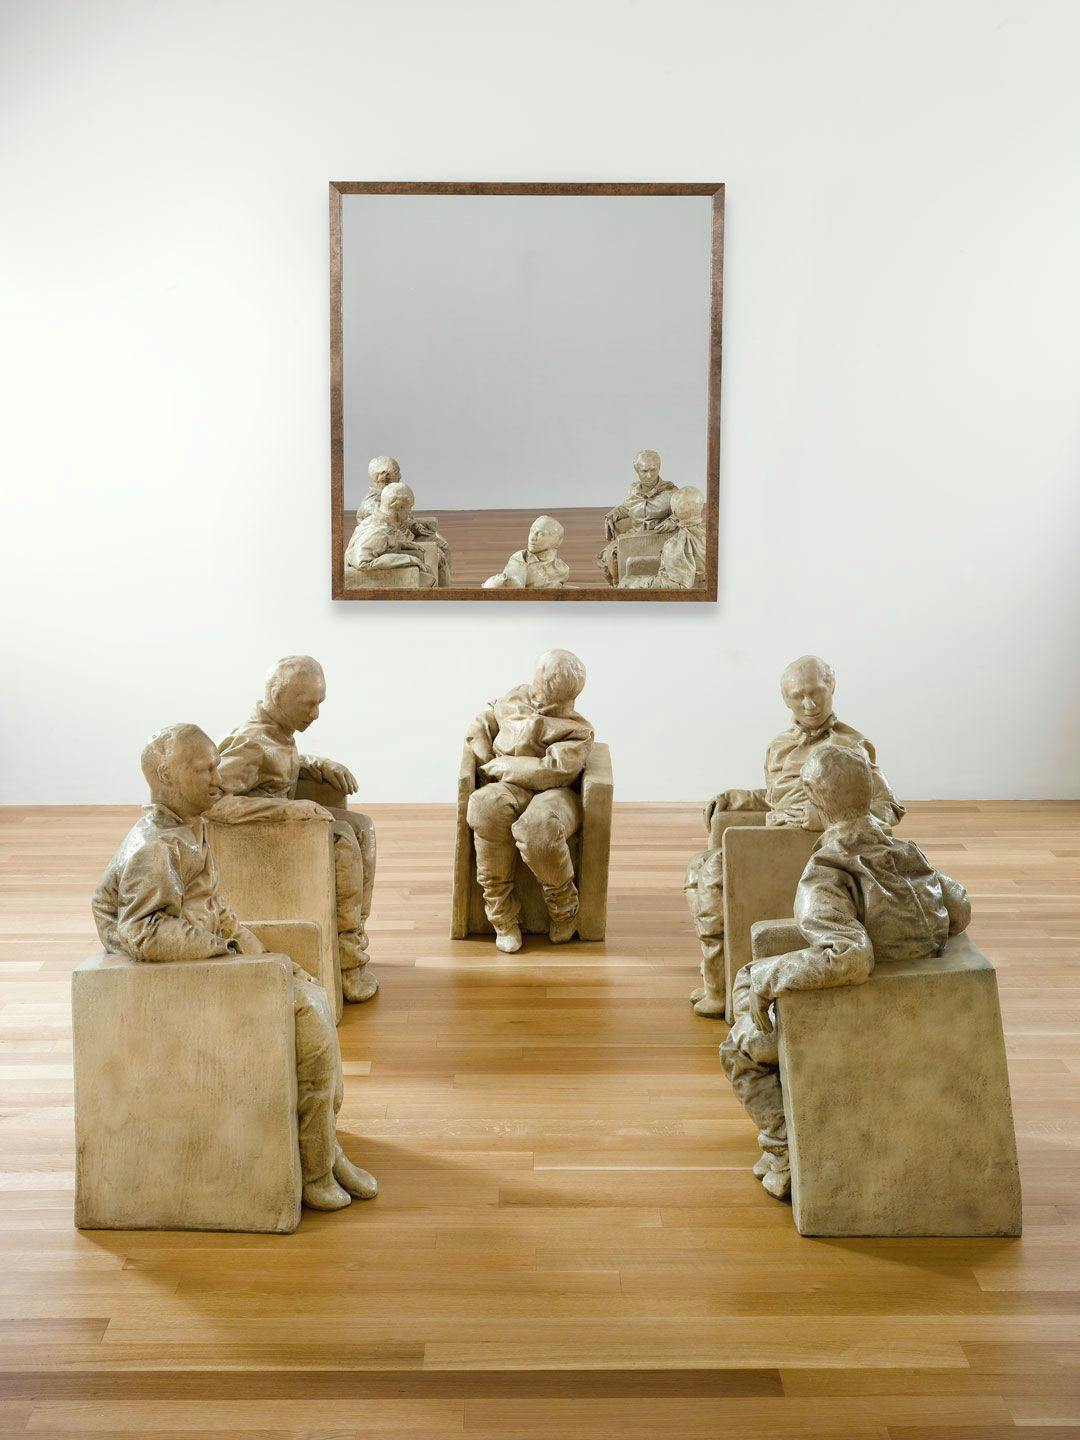 A mixed media sculptural installation by Juan Muñoz, titled Five Seated Figures, dated 1996.